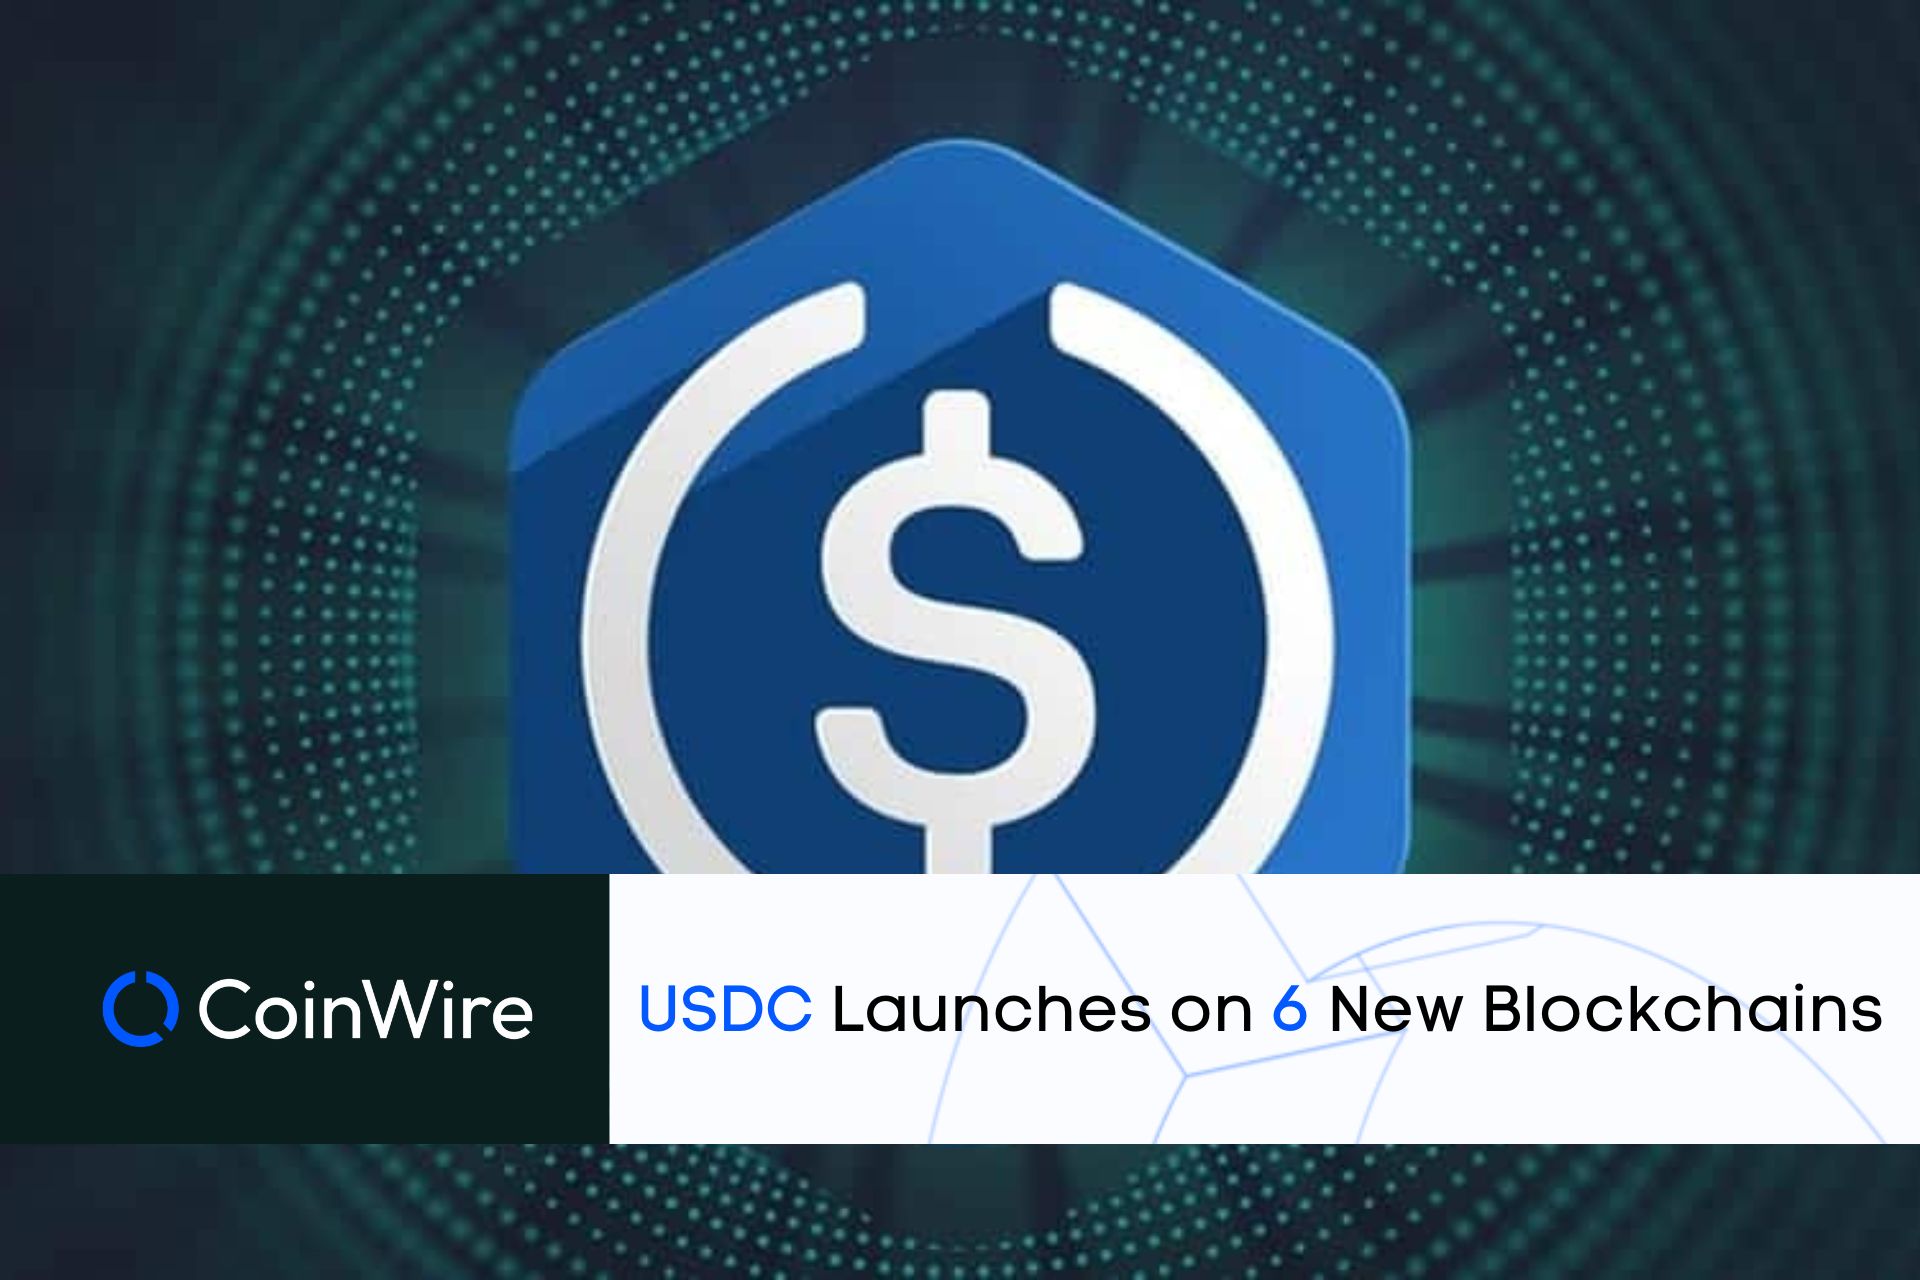 Usdc Launches On 6 New Blockchains Including Polygon Pos, Base, Polkadot, Near, Optimism, And Cosmos